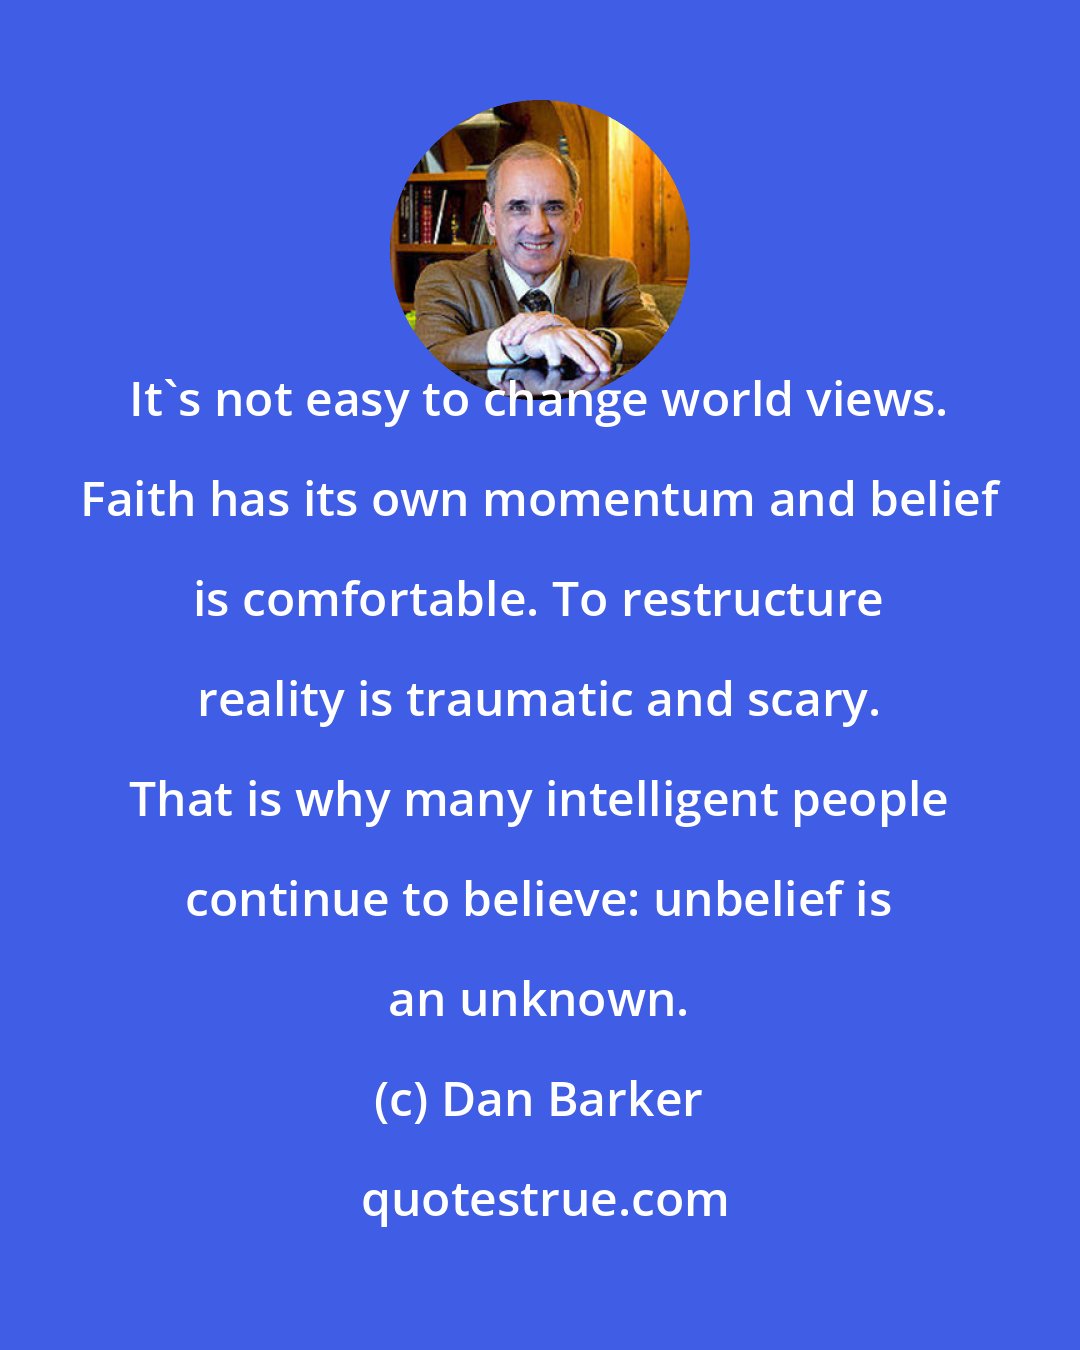 Dan Barker: It's not easy to change world views. Faith has its own momentum and belief is comfortable. To restructure reality is traumatic and scary. That is why many intelligent people continue to believe: unbelief is an unknown.